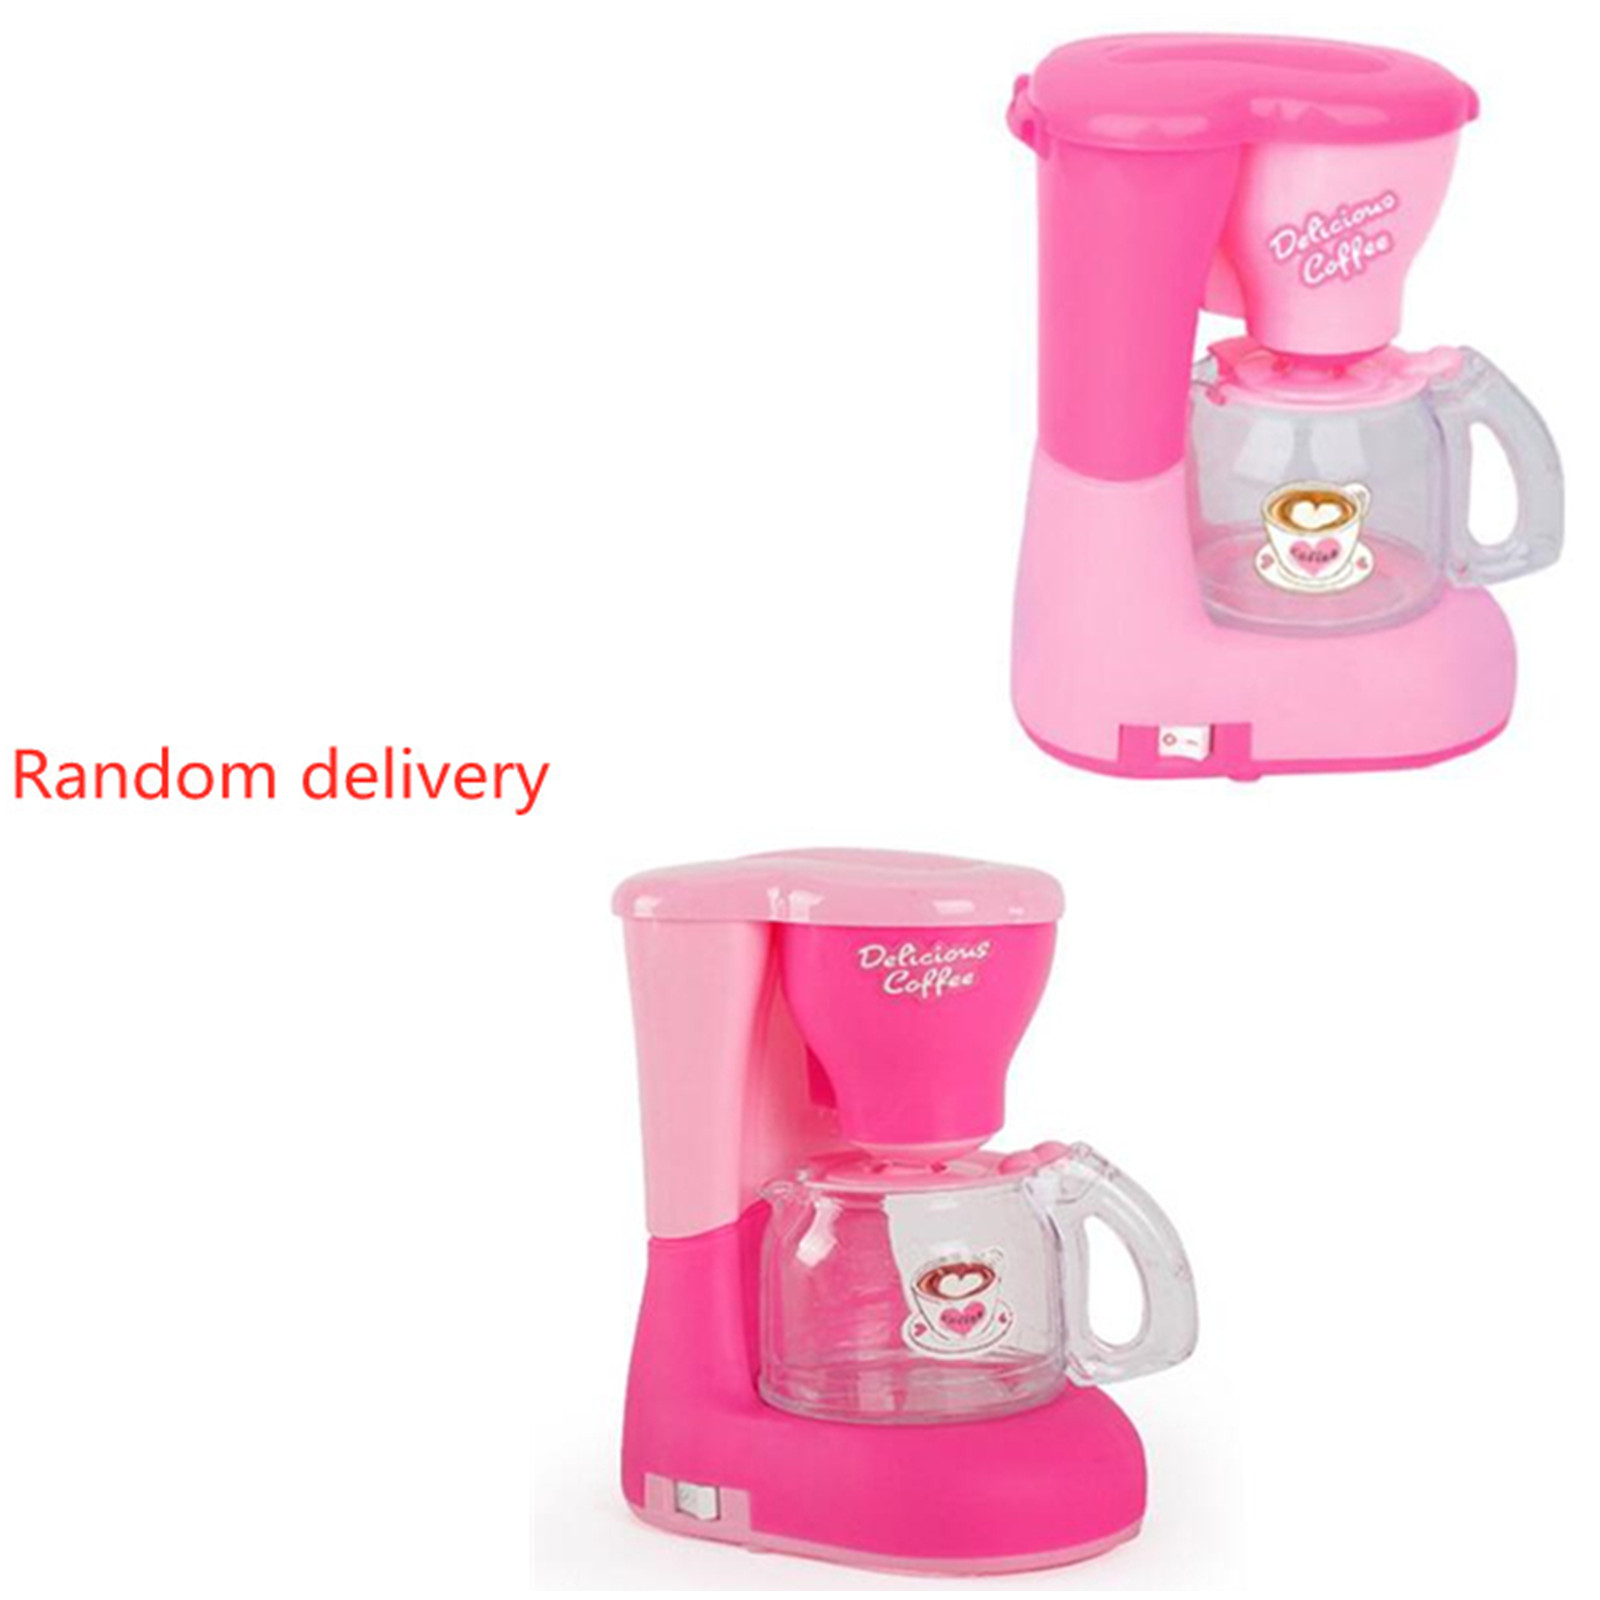 Source Kids house playhouse coffee toys coffee shop toys plastic coffee  machine with light sound for kids on m.